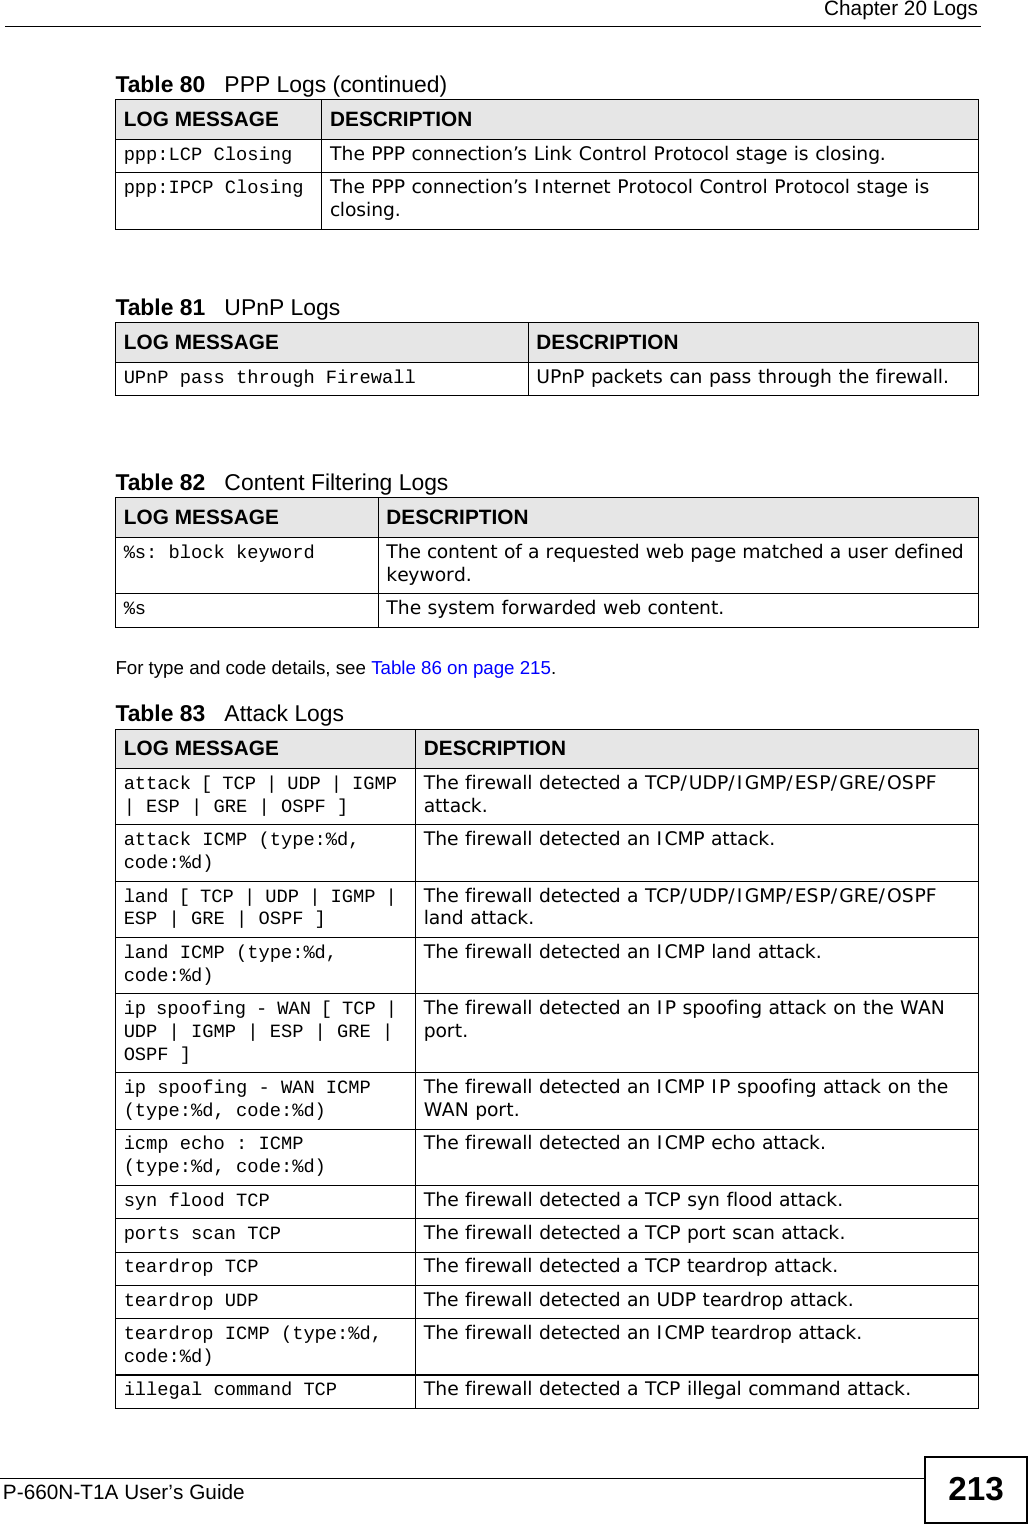  Chapter 20 LogsP-660N-T1A User’s Guide 213   For type and code details, see Table 86 on page 215.ppp:LCP Closing The PPP connection’s Link Control Protocol stage is closing.ppp:IPCP Closing The PPP connection’s Internet Protocol Control Protocol stage is closing.Table 81   UPnP LogsLOG MESSAGE DESCRIPTIONUPnP pass through Firewall UPnP packets can pass through the firewall.Table 82   Content Filtering LogsLOG MESSAGE DESCRIPTION%s: block keyword The content of a requested web page matched a user defined keyword.%s The system forwarded web content.Table 83   Attack LogsLOG MESSAGE DESCRIPTIONattack [ TCP | UDP | IGMP | ESP | GRE | OSPF ] The firewall detected a TCP/UDP/IGMP/ESP/GRE/OSPF attack.attack ICMP (type:%d, code:%d) The firewall detected an ICMP attack.land [ TCP | UDP | IGMP | ESP | GRE | OSPF ] The firewall detected a TCP/UDP/IGMP/ESP/GRE/OSPF land attack.land ICMP (type:%d, code:%d) The firewall detected an ICMP land attack.ip spoofing - WAN [ TCP | UDP | IGMP | ESP | GRE | OSPF ]The firewall detected an IP spoofing attack on the WAN port.ip spoofing - WAN ICMP (type:%d, code:%d) The firewall detected an ICMP IP spoofing attack on the WAN port. icmp echo : ICMP (type:%d, code:%d) The firewall detected an ICMP echo attack. syn flood TCP The firewall detected a TCP syn flood attack.ports scan TCP The firewall detected a TCP port scan attack.teardrop TCP The firewall detected a TCP teardrop attack.teardrop UDP The firewall detected an UDP teardrop attack.teardrop ICMP (type:%d, code:%d) The firewall detected an ICMP teardrop attack. illegal command TCP The firewall detected a TCP illegal command attack.Table 80   PPP Logs (continued)LOG MESSAGE DESCRIPTION